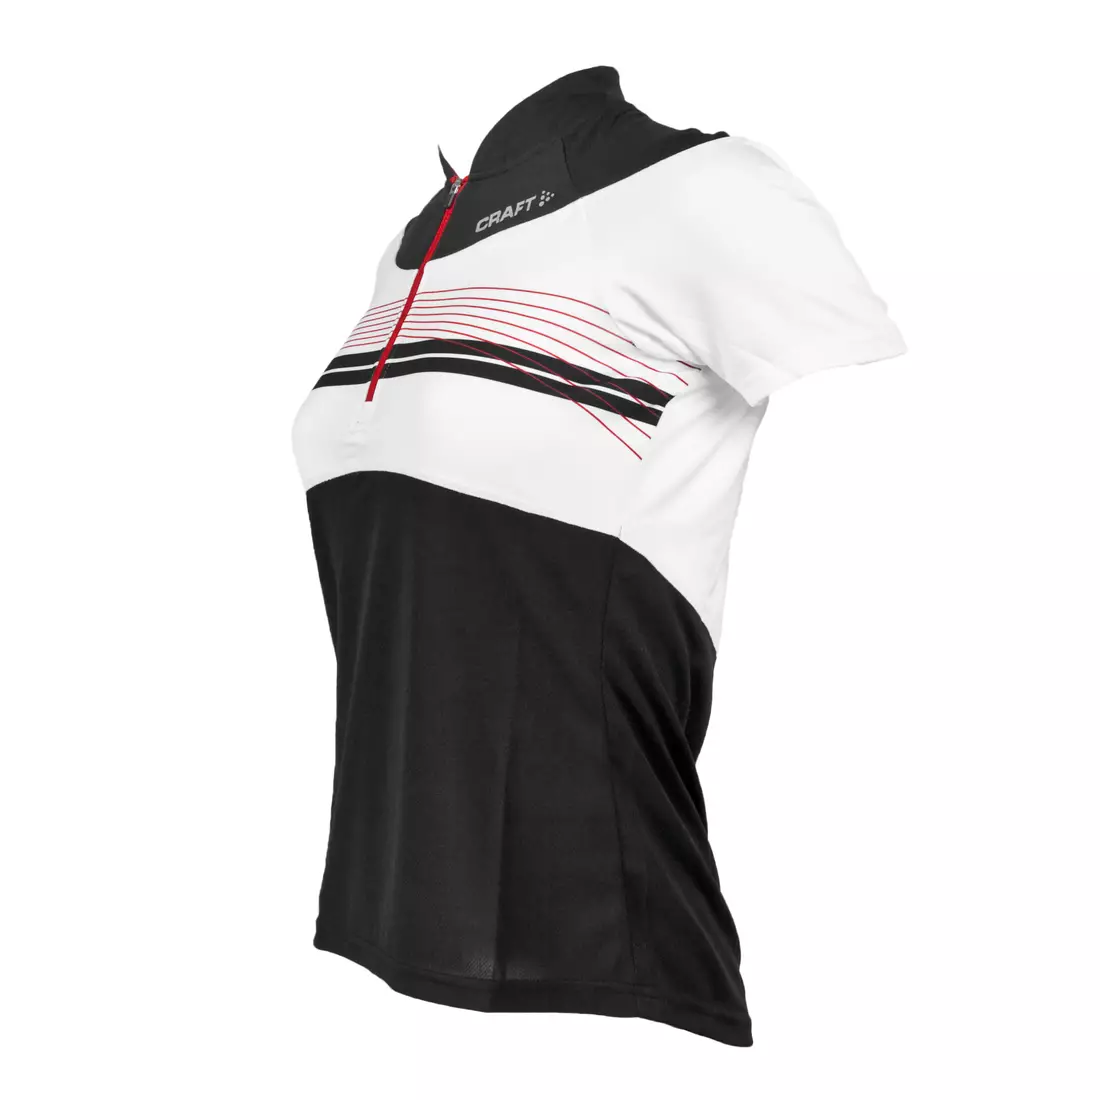 CRAFT ACTIVE BIKE - women's cycling jersey 1901942-9900, color: white and black